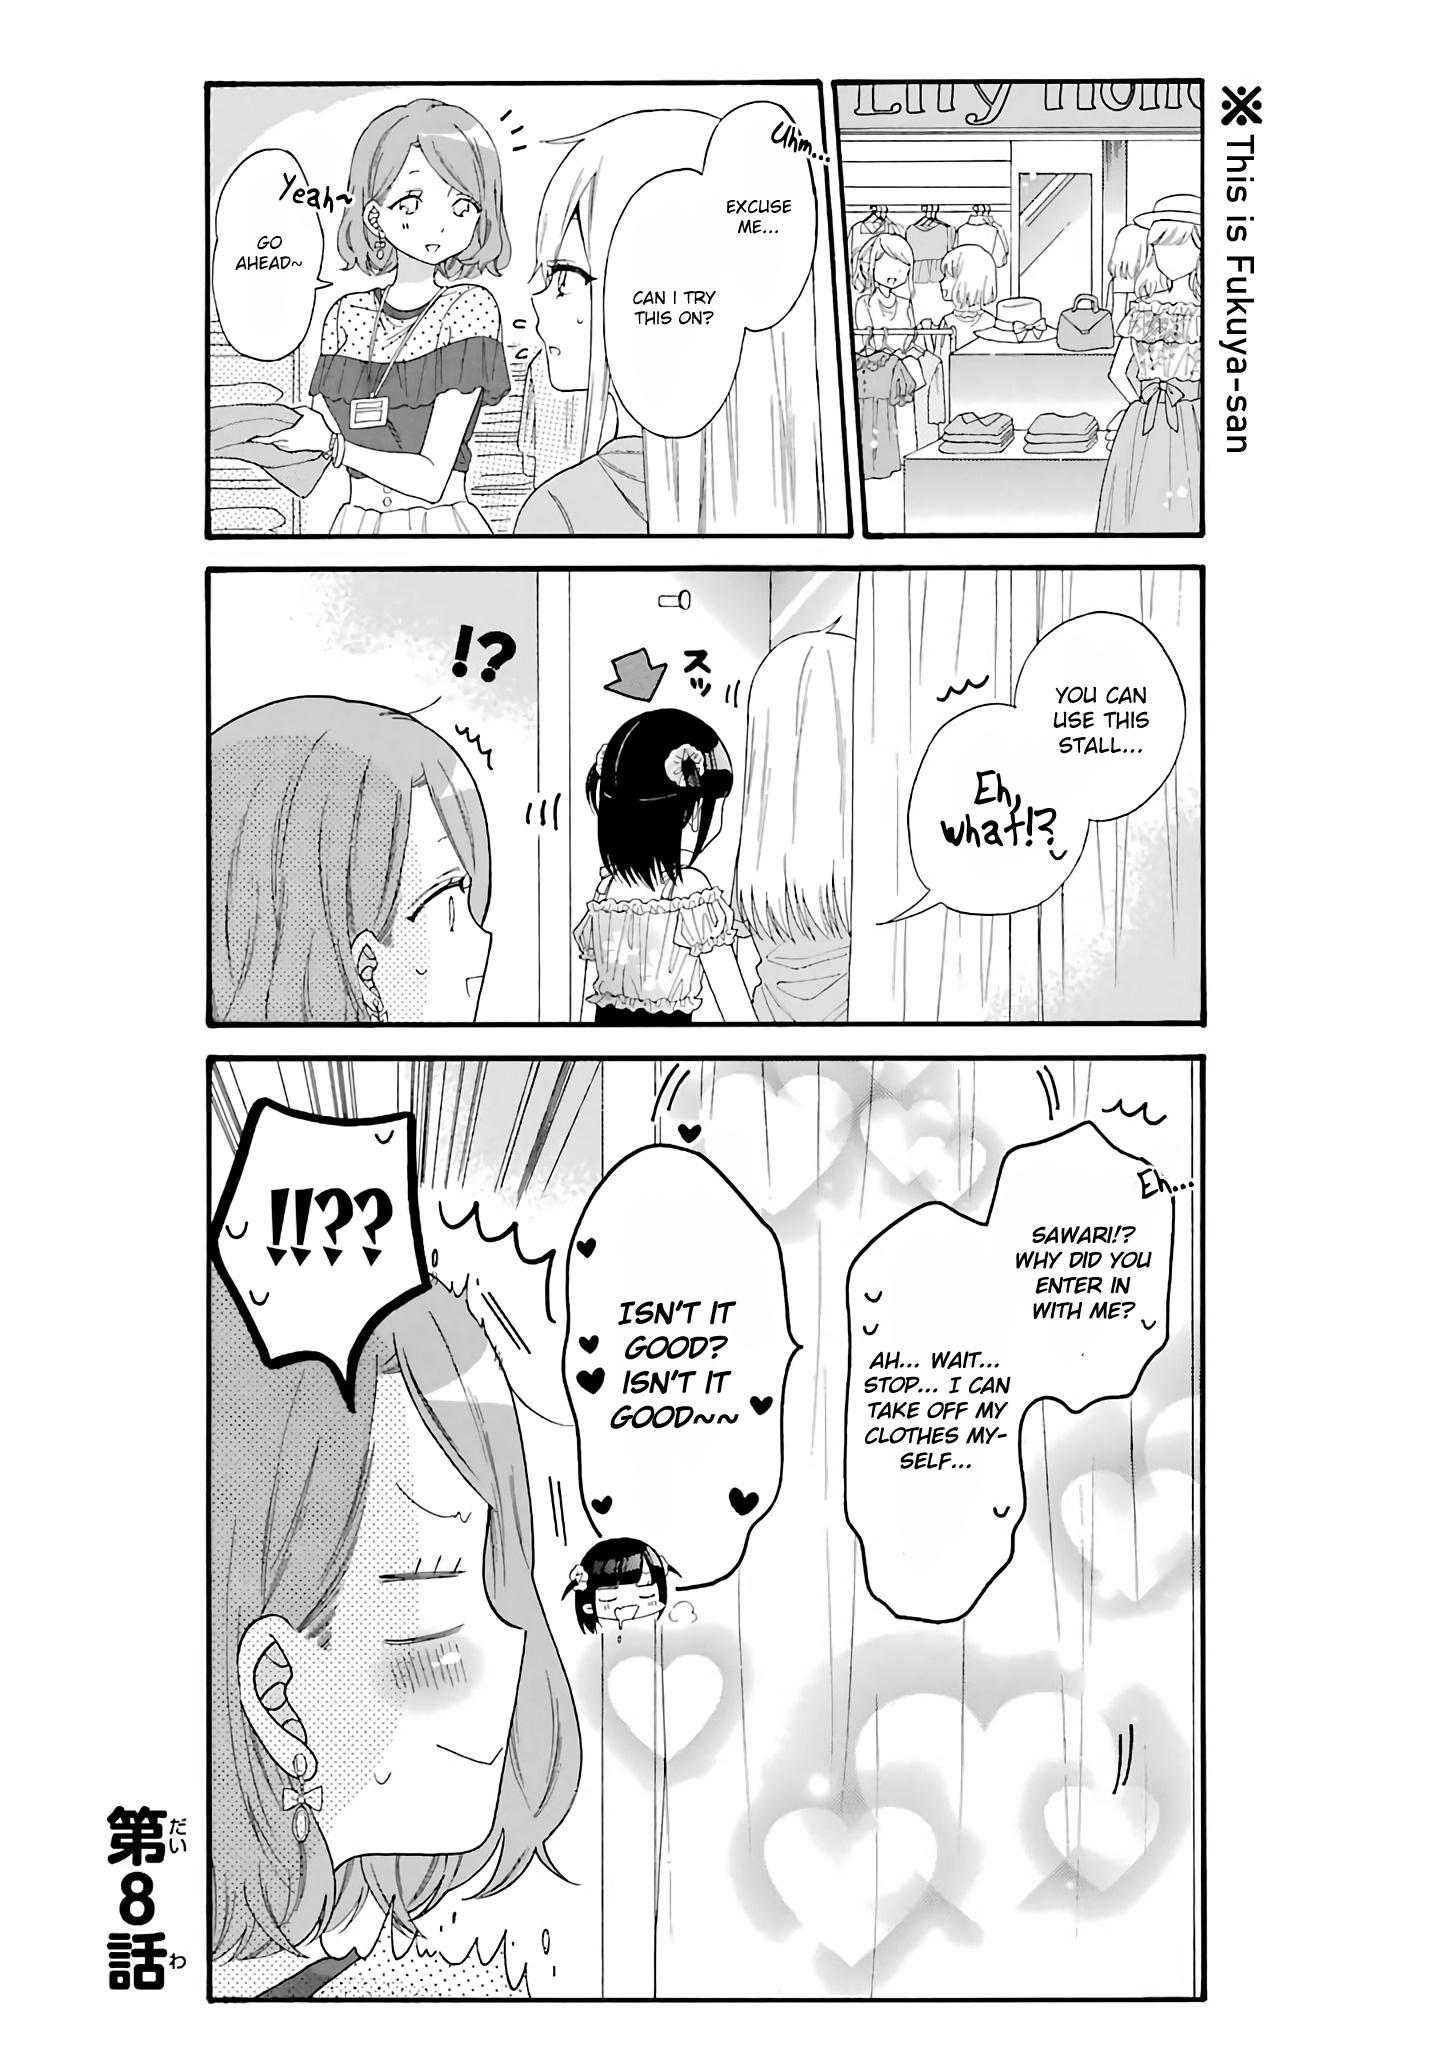 Girls X Sexual Harassment Life - Page 1